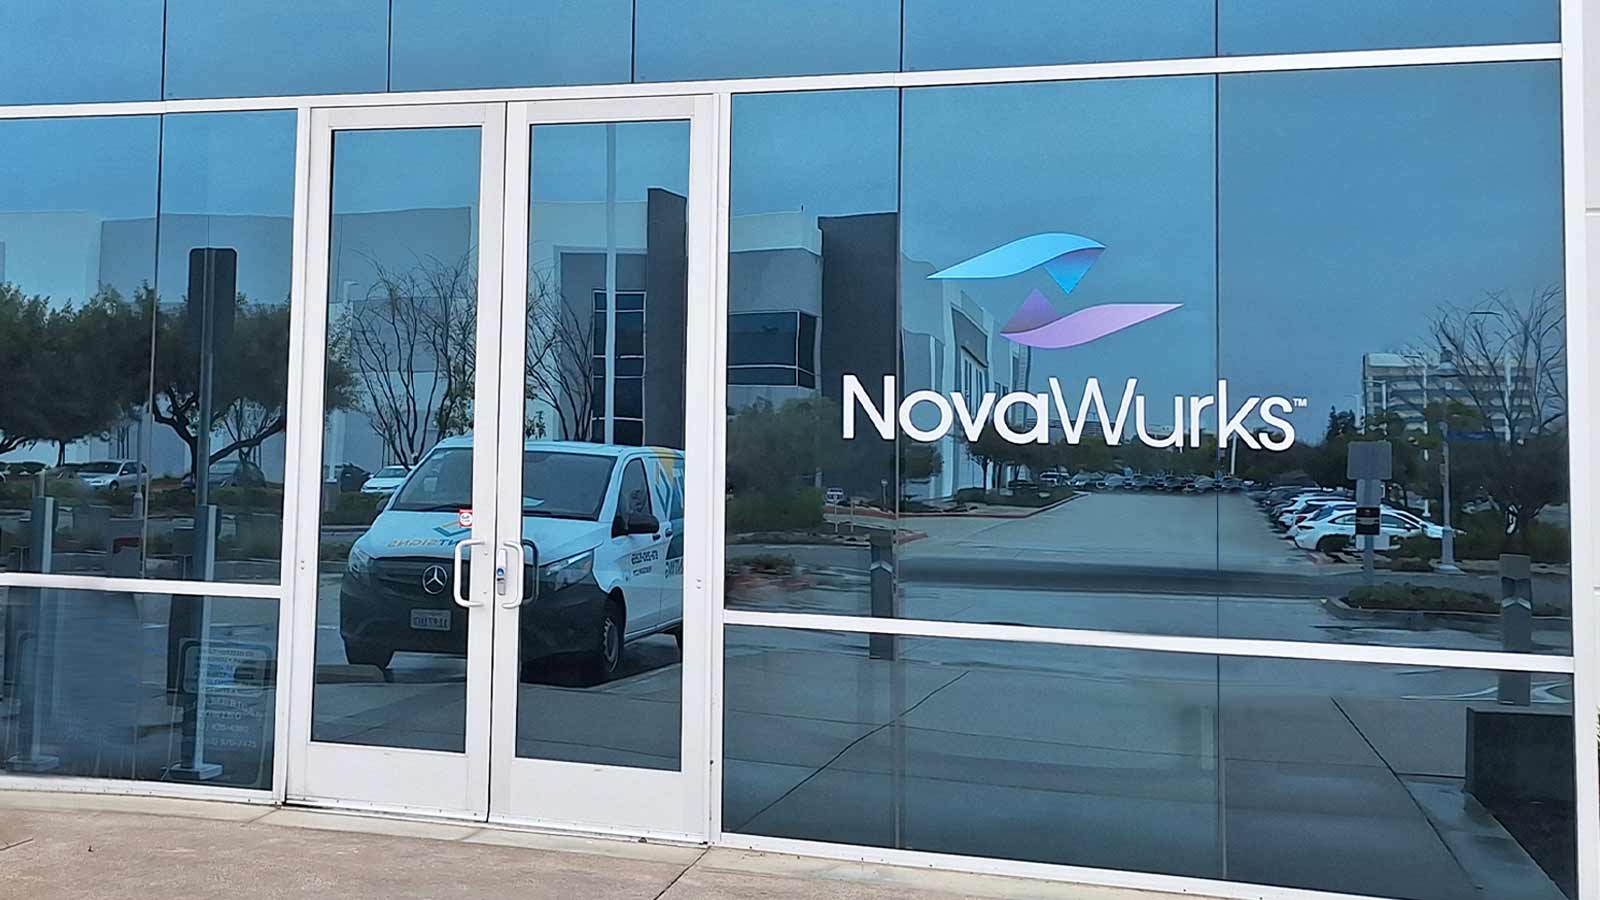 novawurks window decal attached to the windows